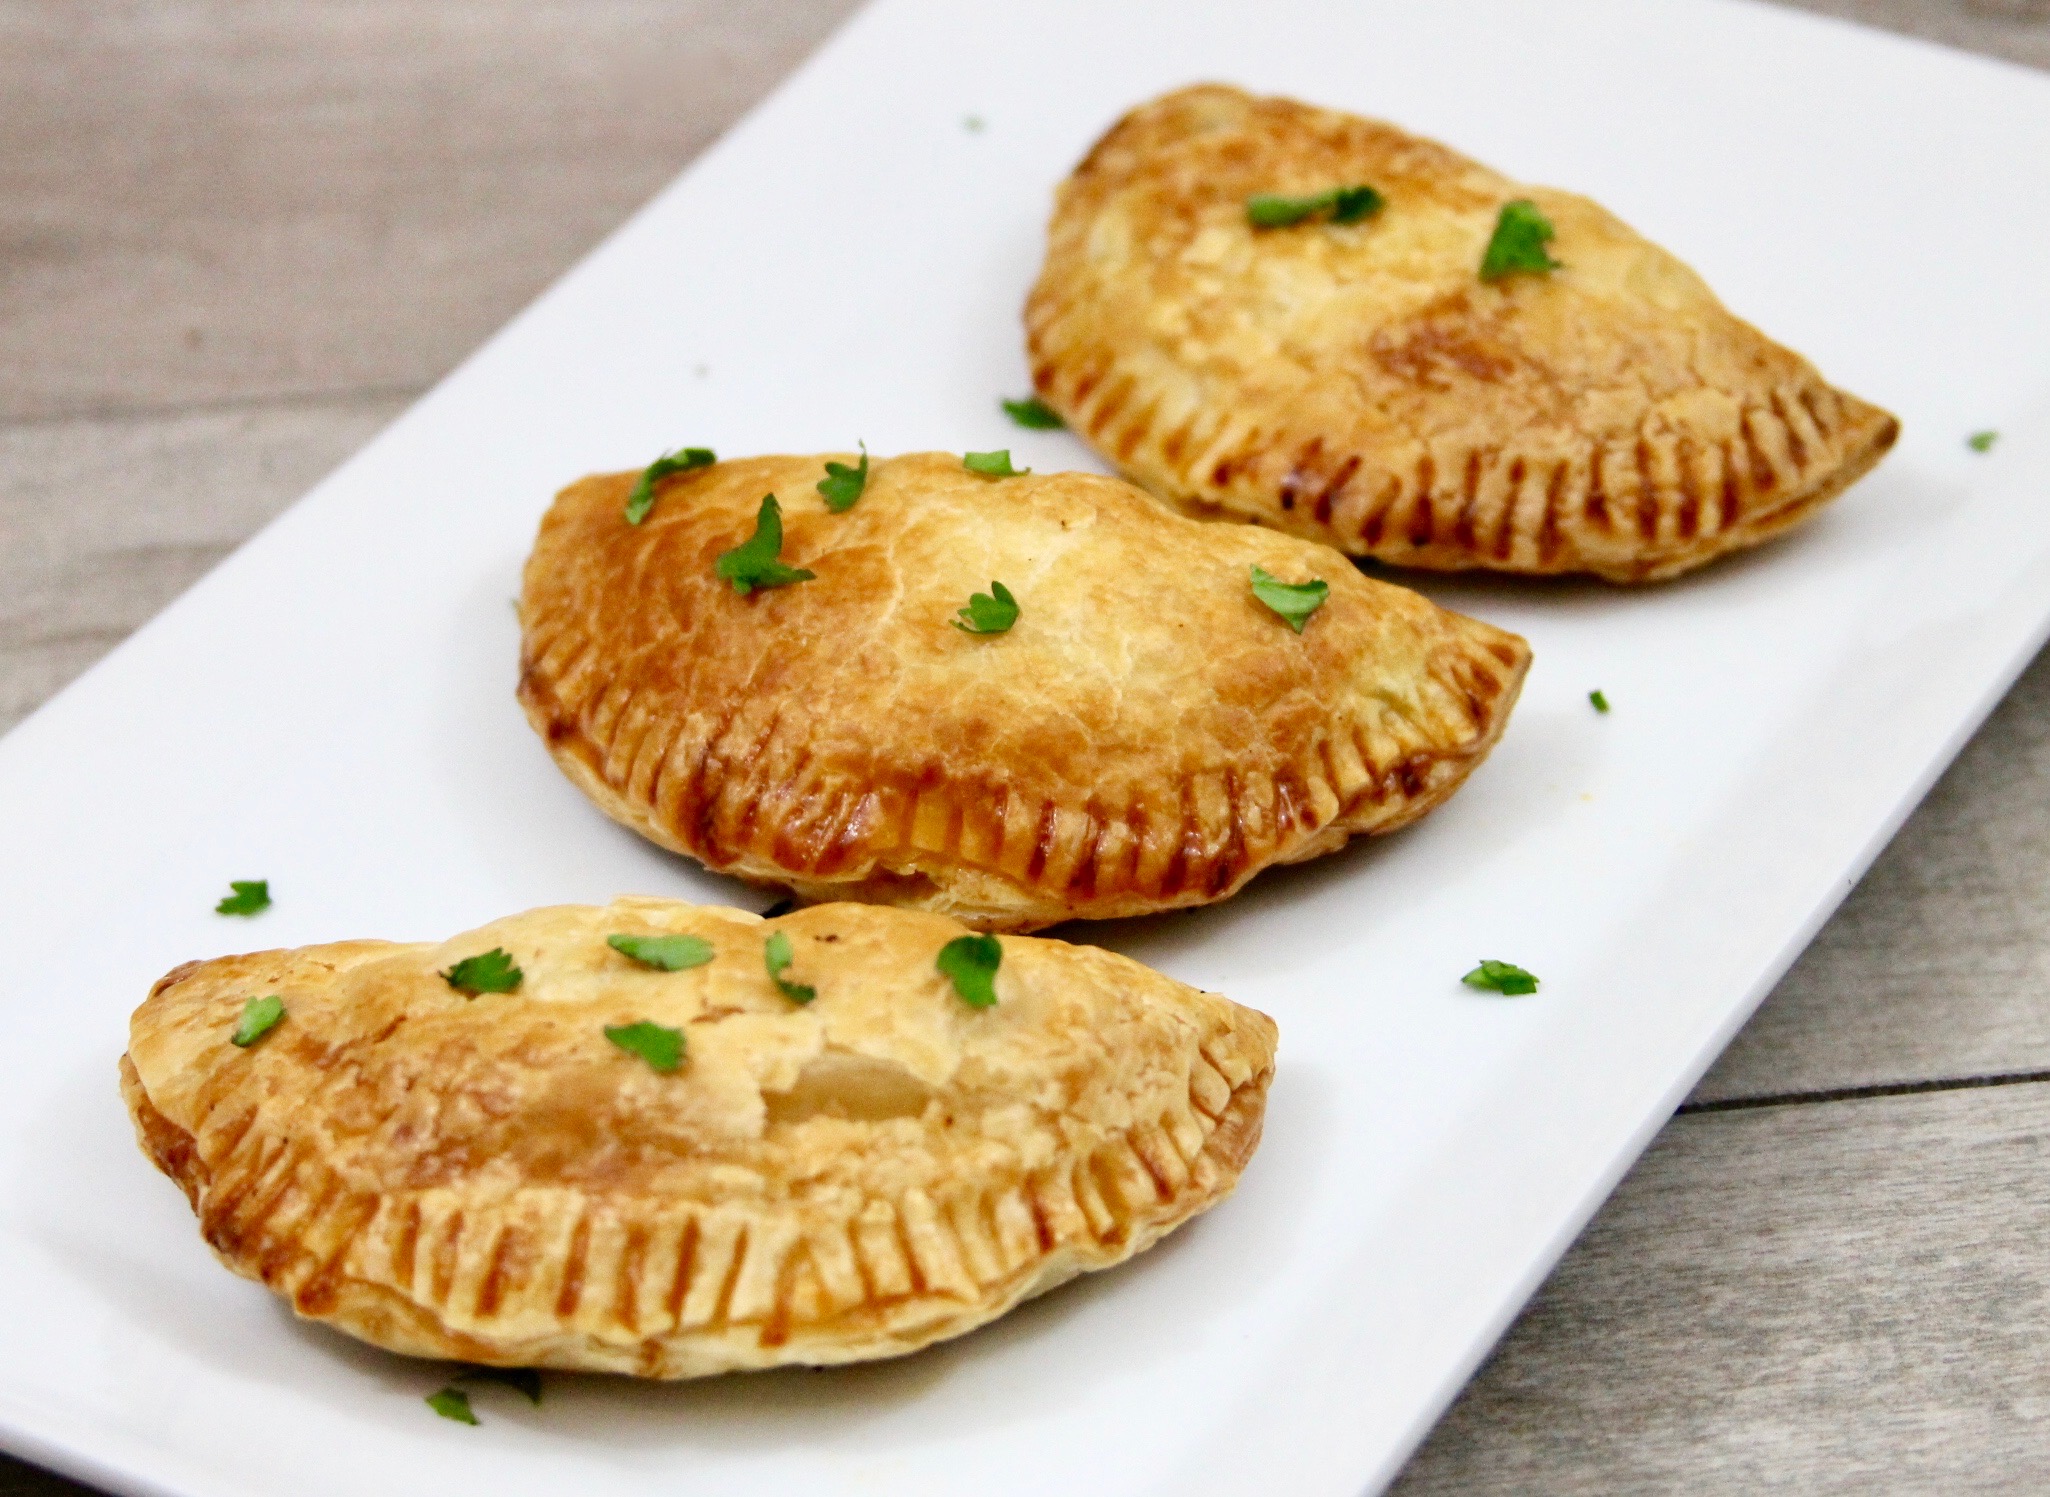 Chilean lamb and beef baked empanadas